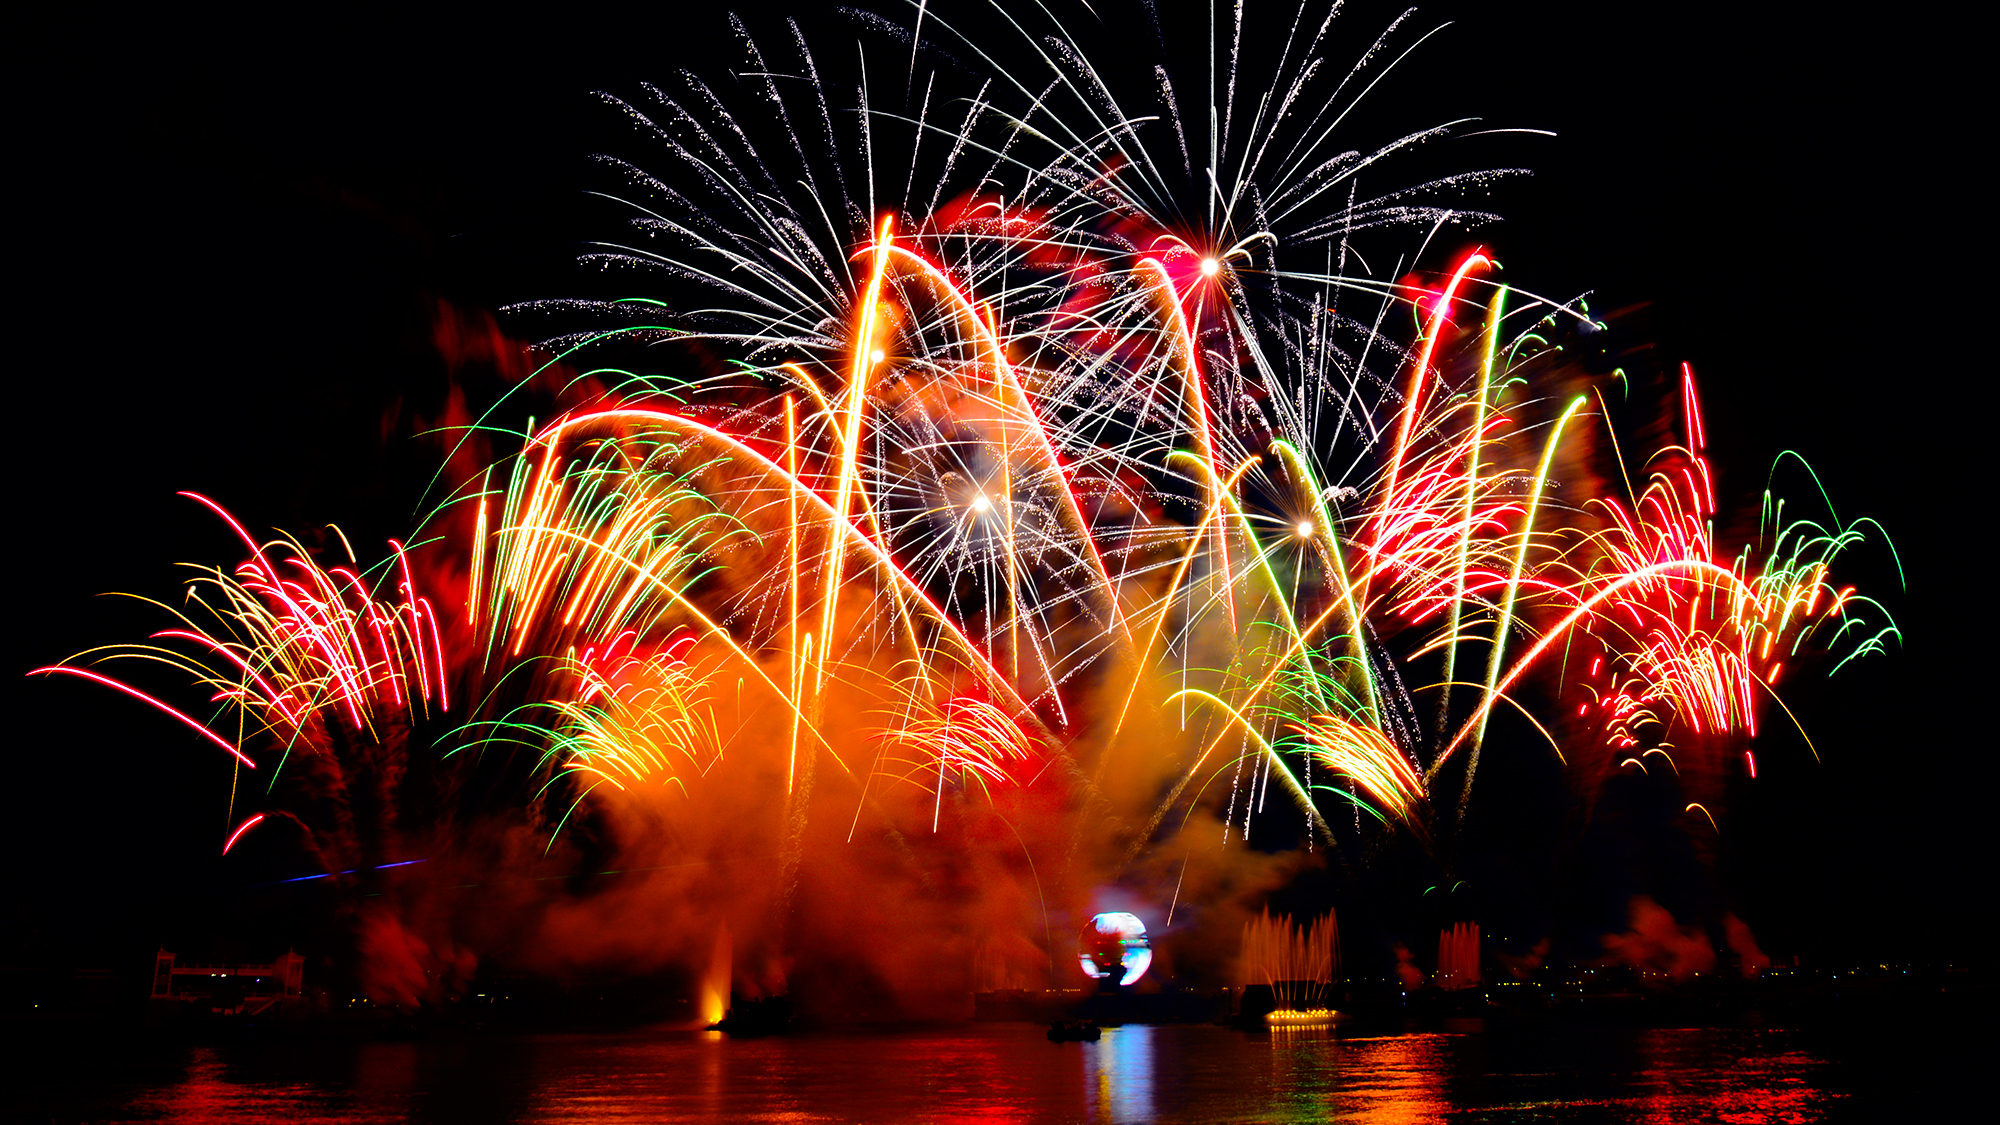 Illuminations Reflections of Earth photos | KennythePirate's Unofficial ...